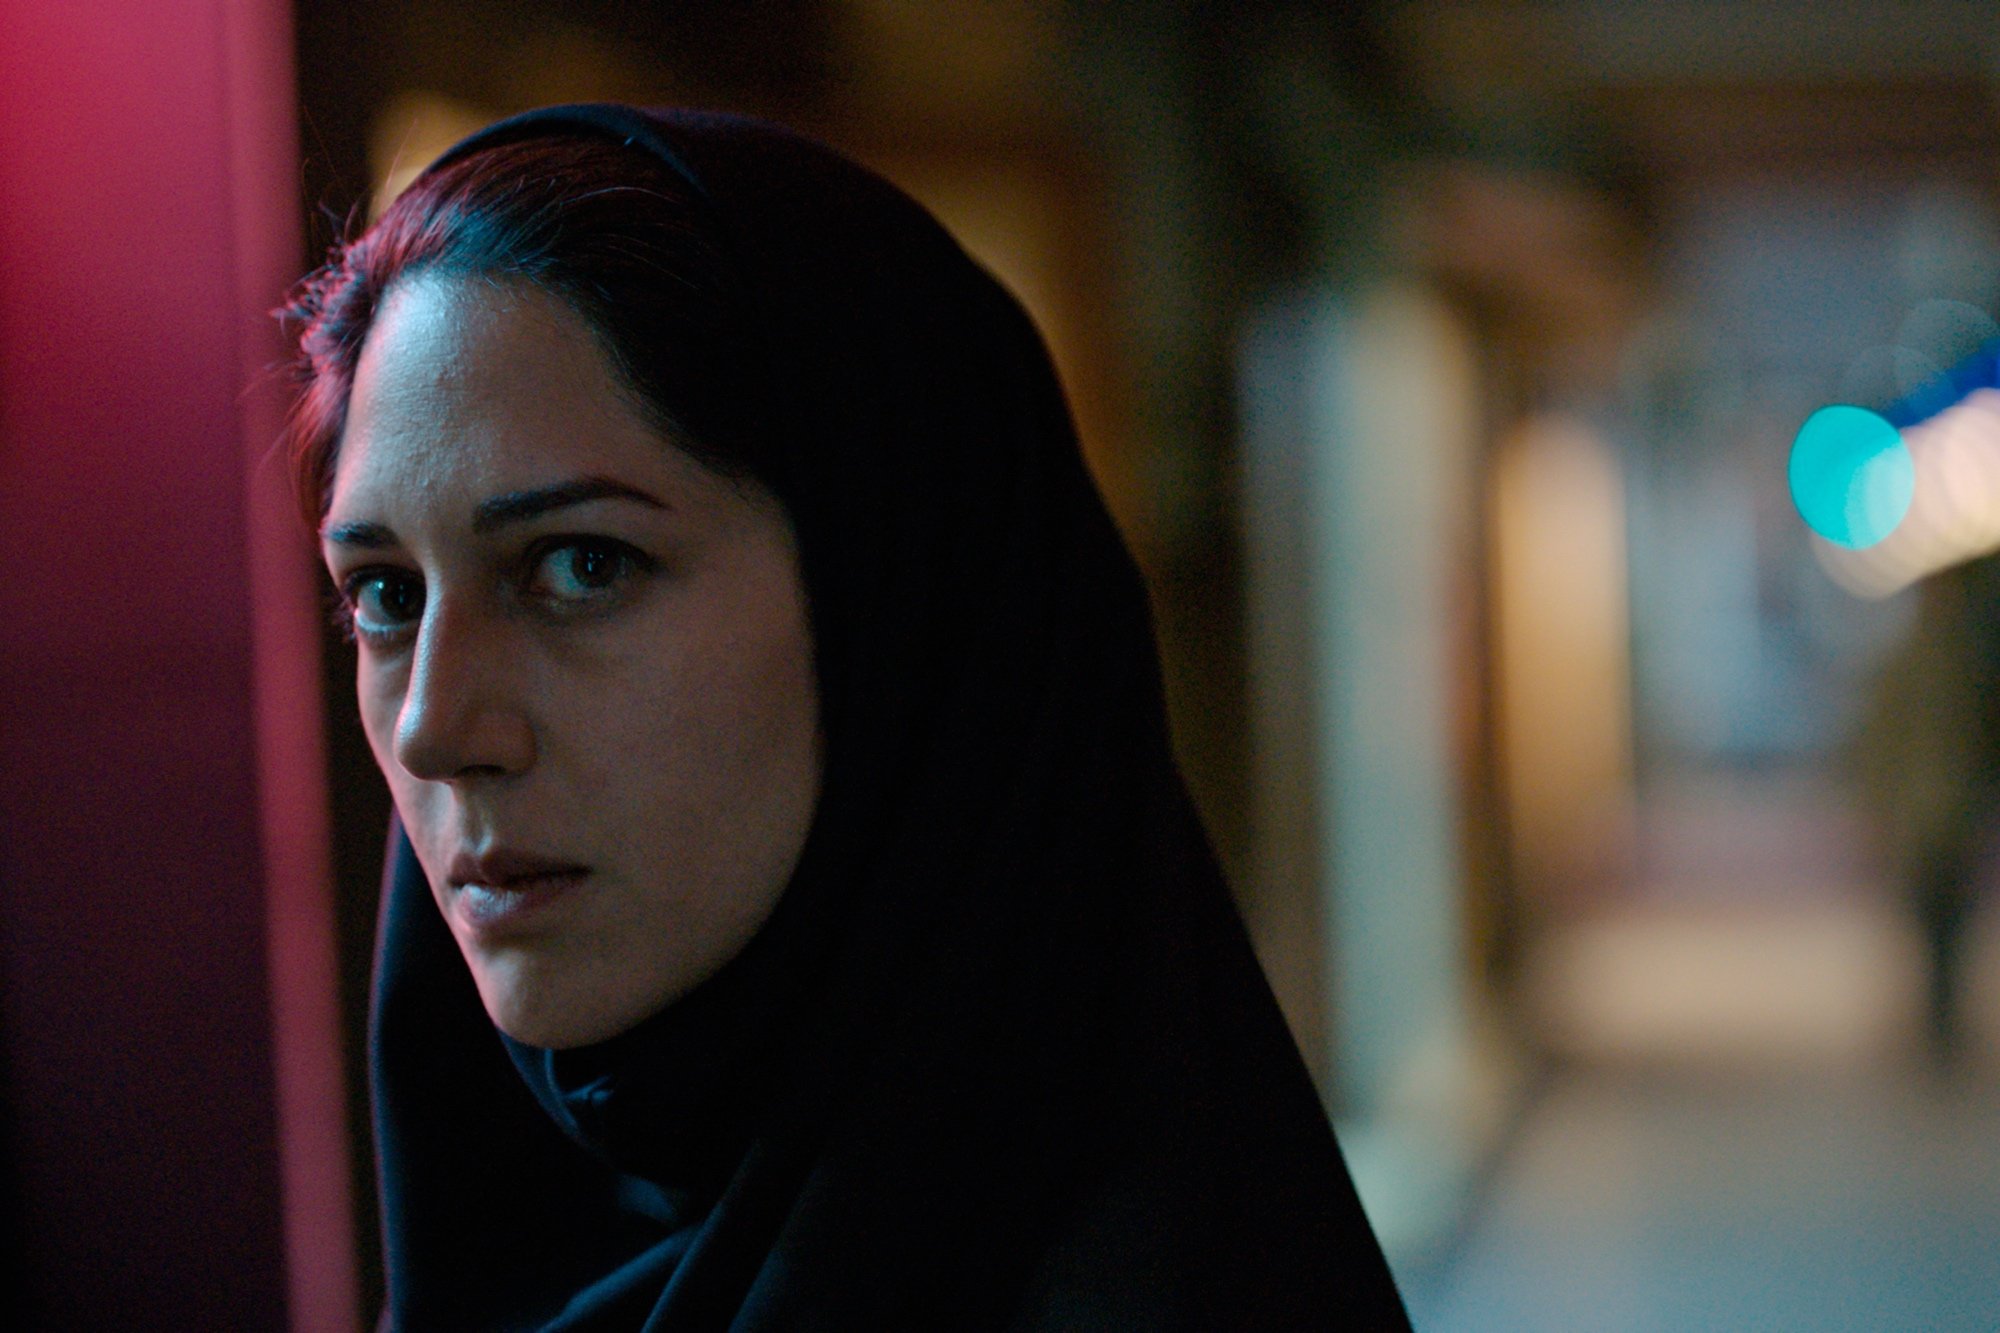 'Holy Spider' Zar Amir-Ebrahimi as Rahimi wearing a black chador looking intensely